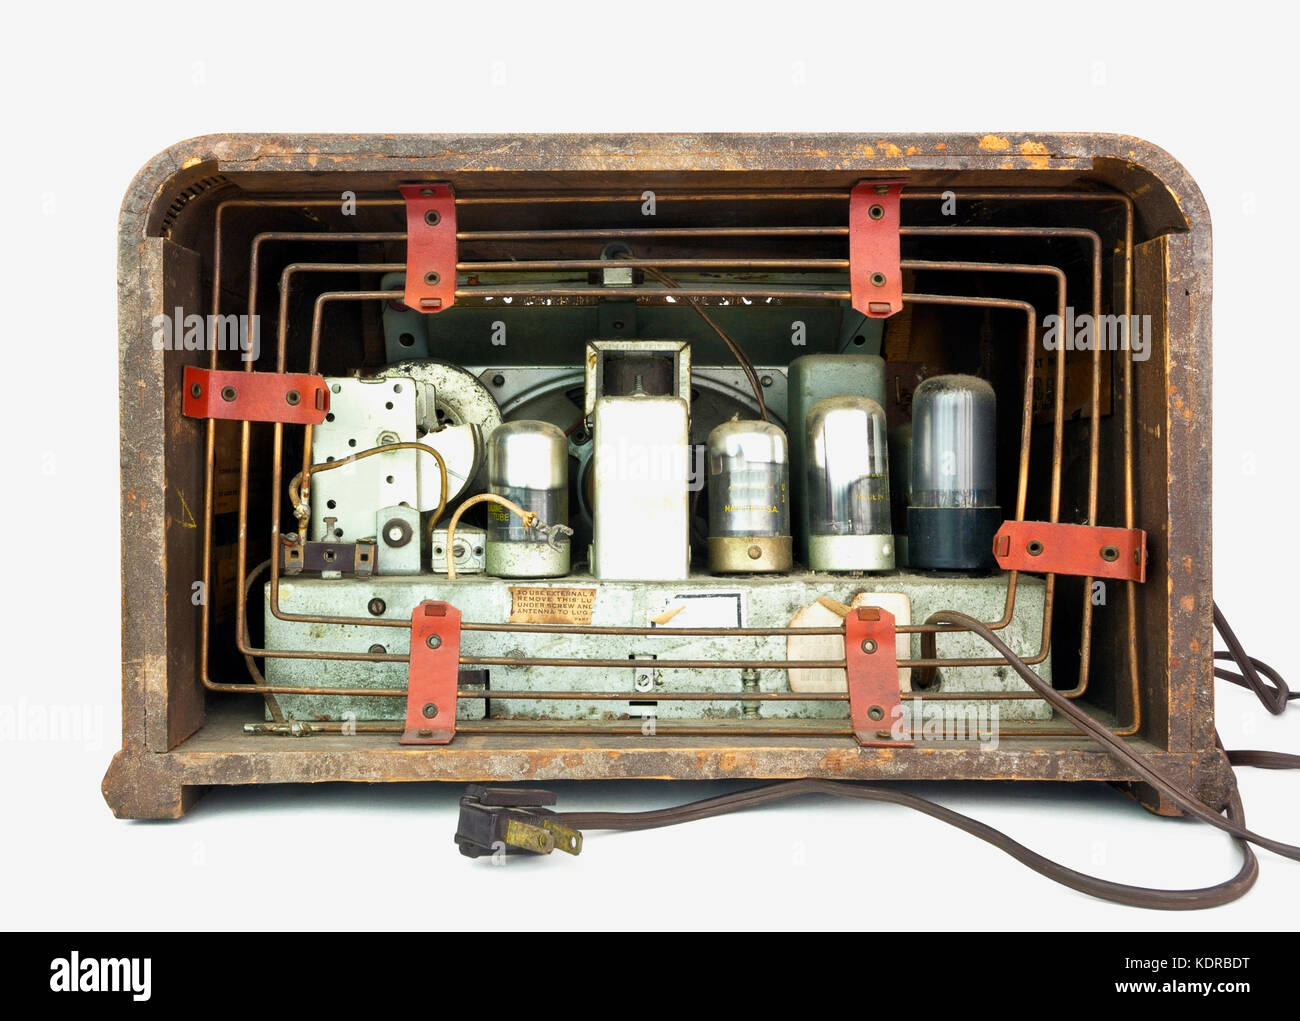 Rear view of antique vacuum tube radio in wood case. Isolated. Stock Photo